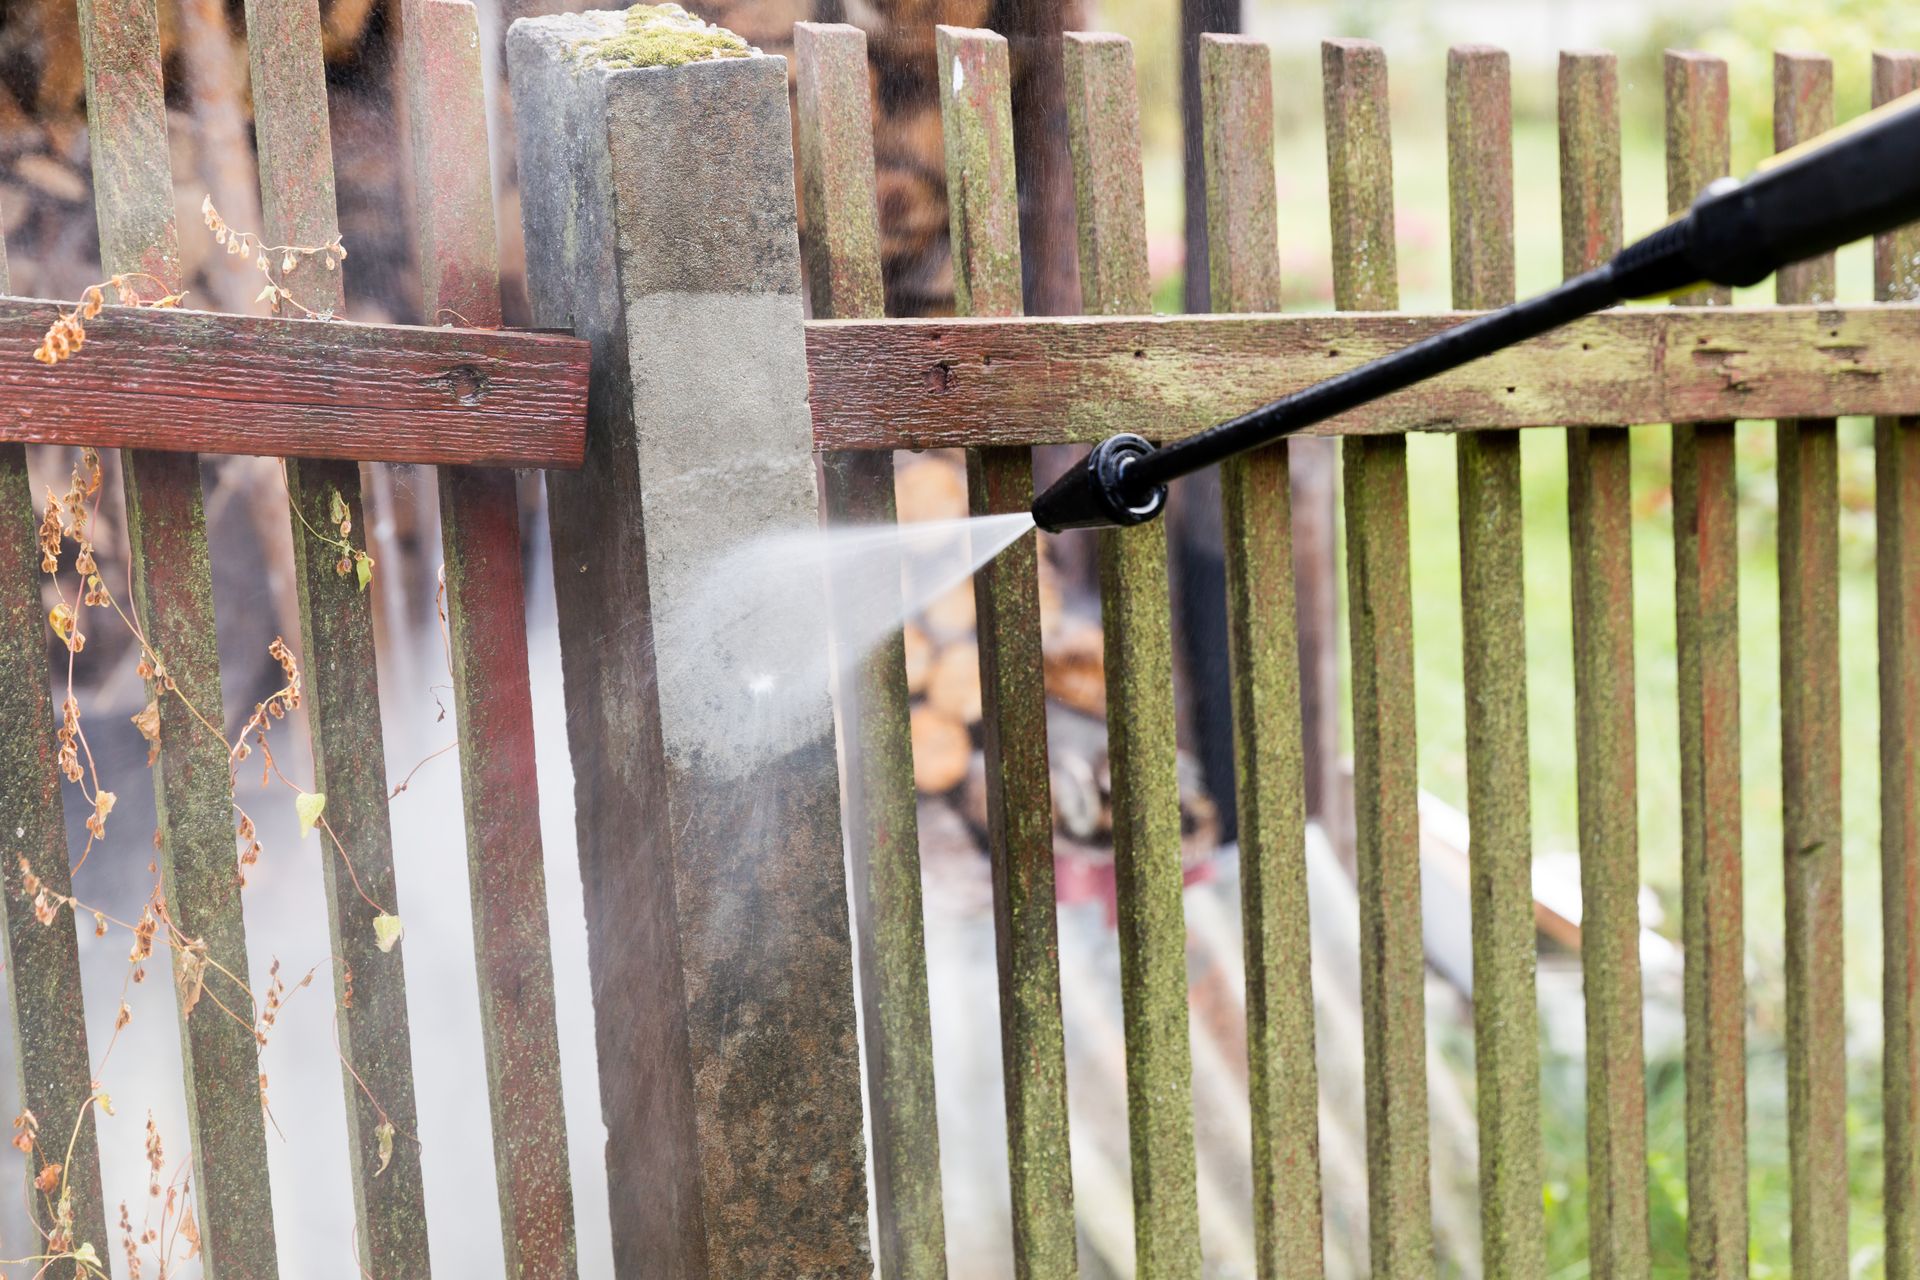 Cleaning a fence